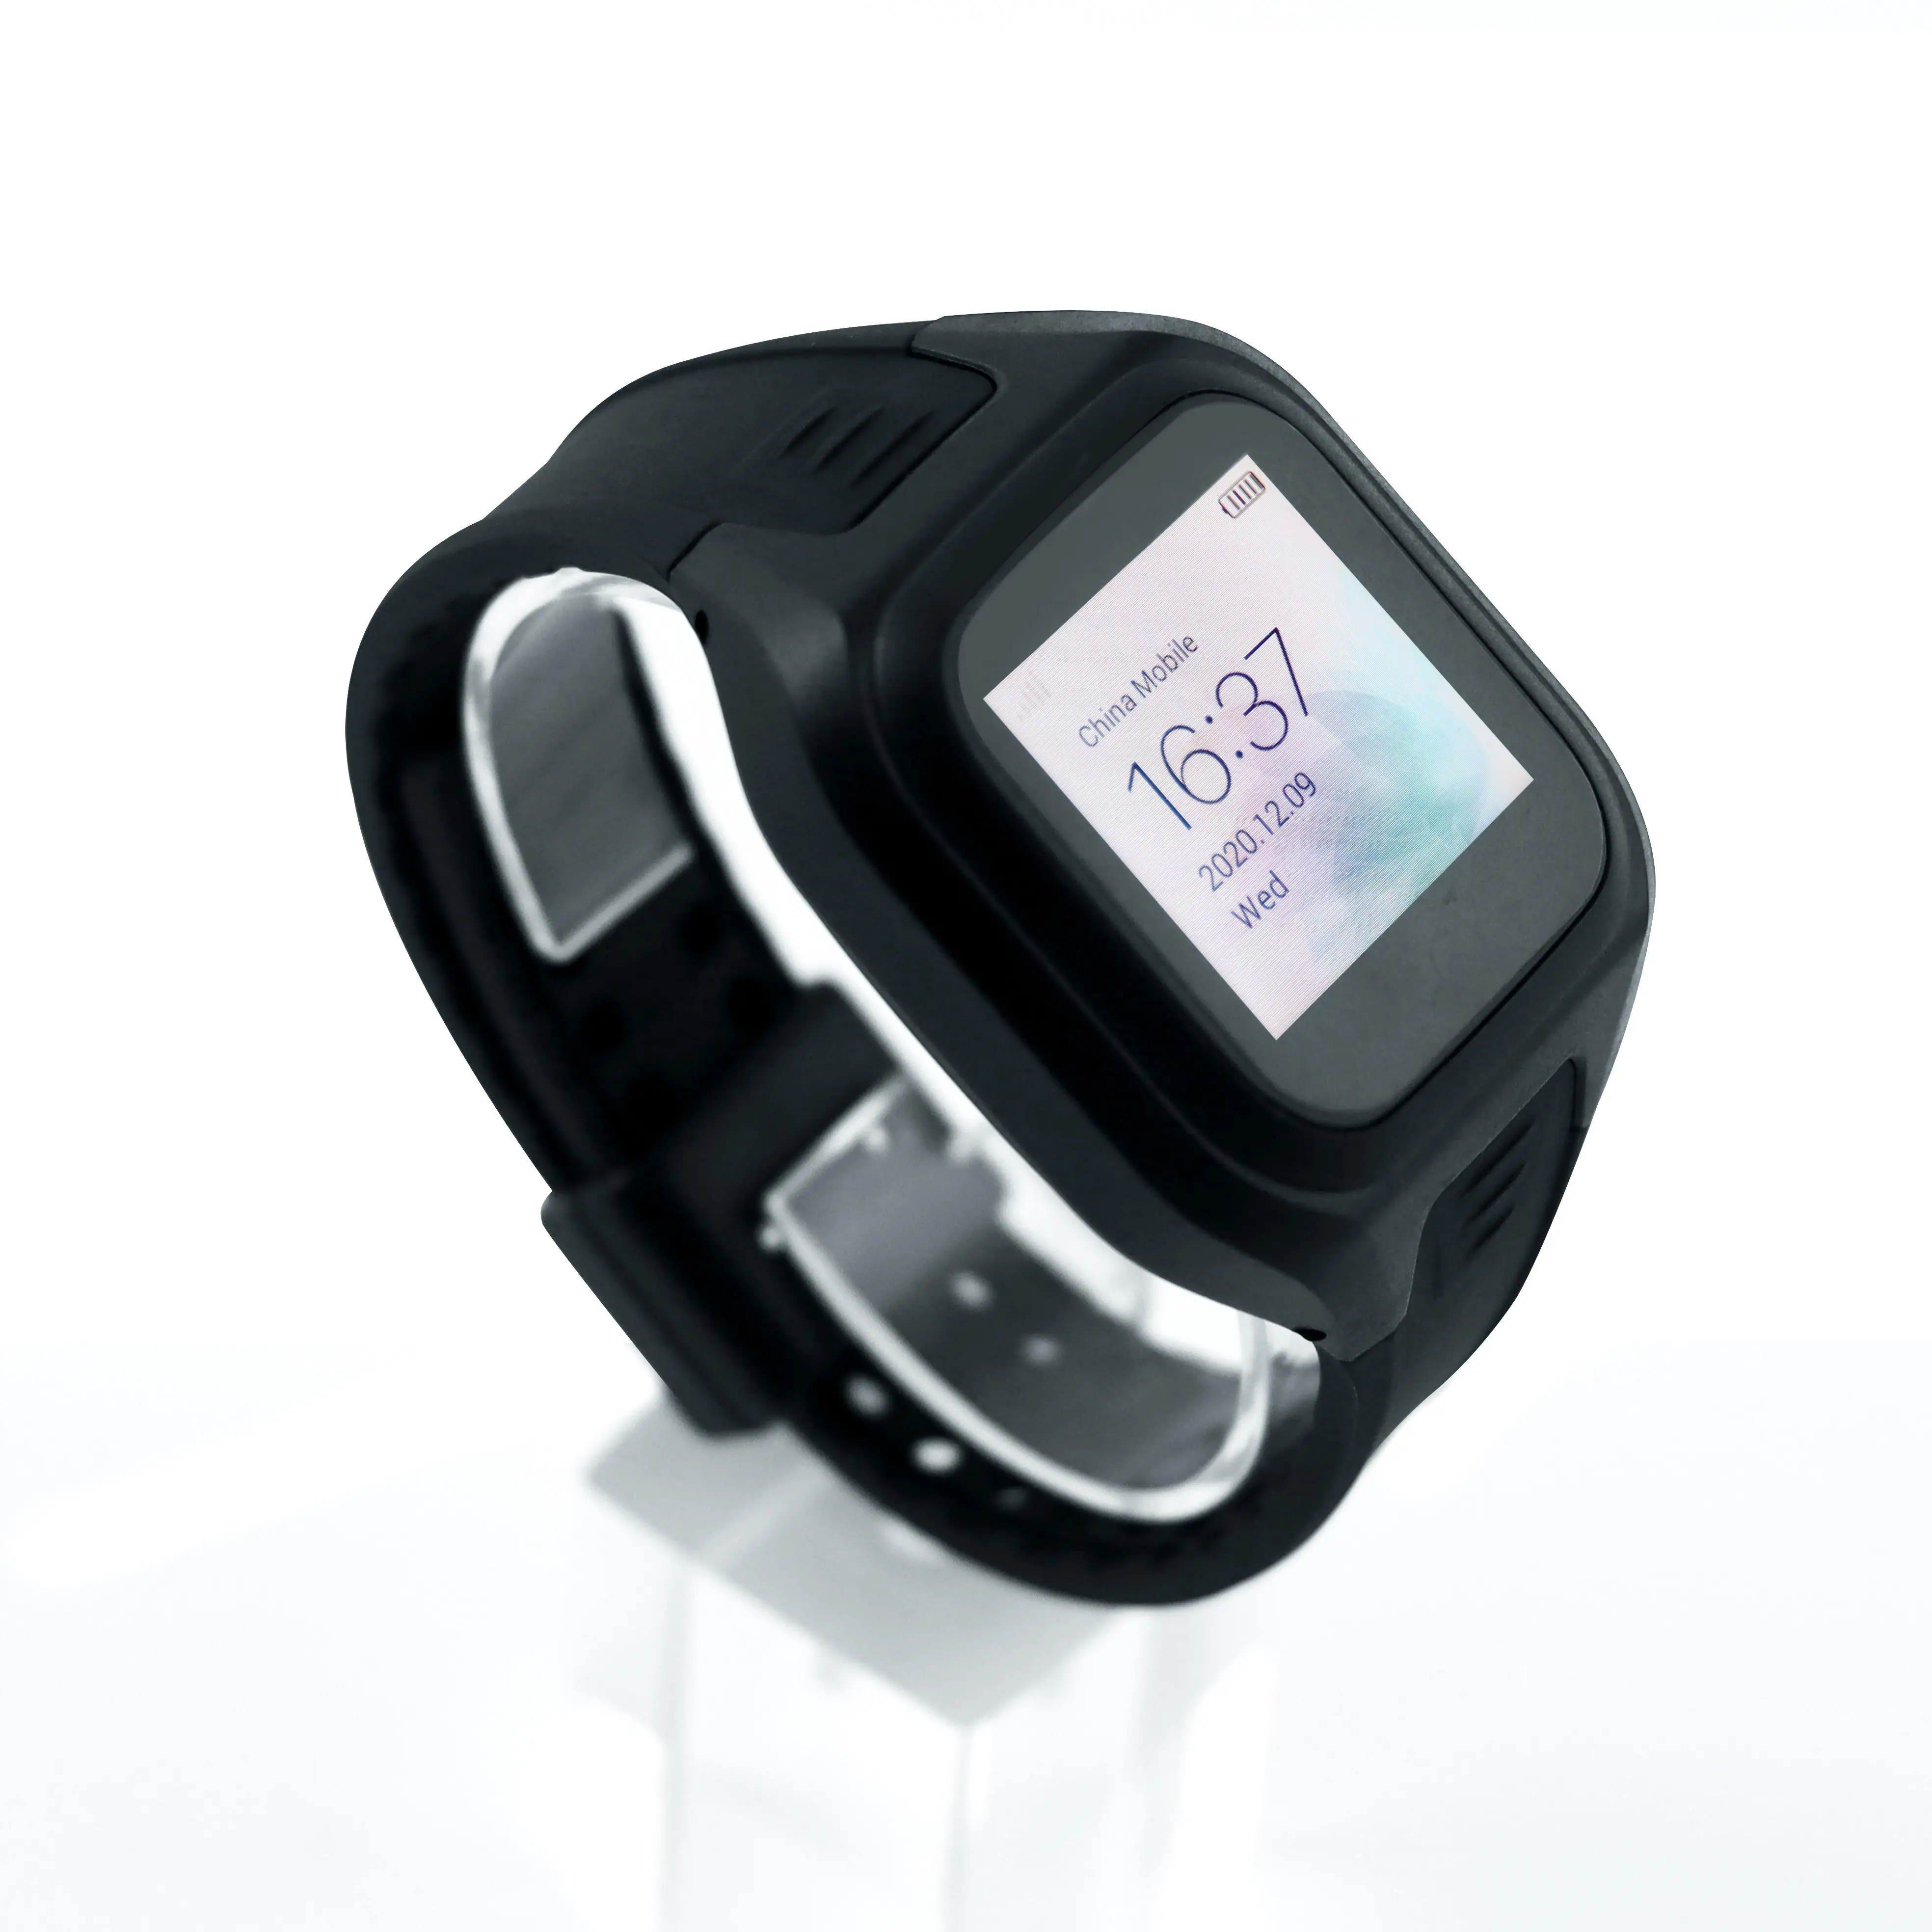 

Anti-tamper personal tracker Virus Patient tracking device GPS Watch